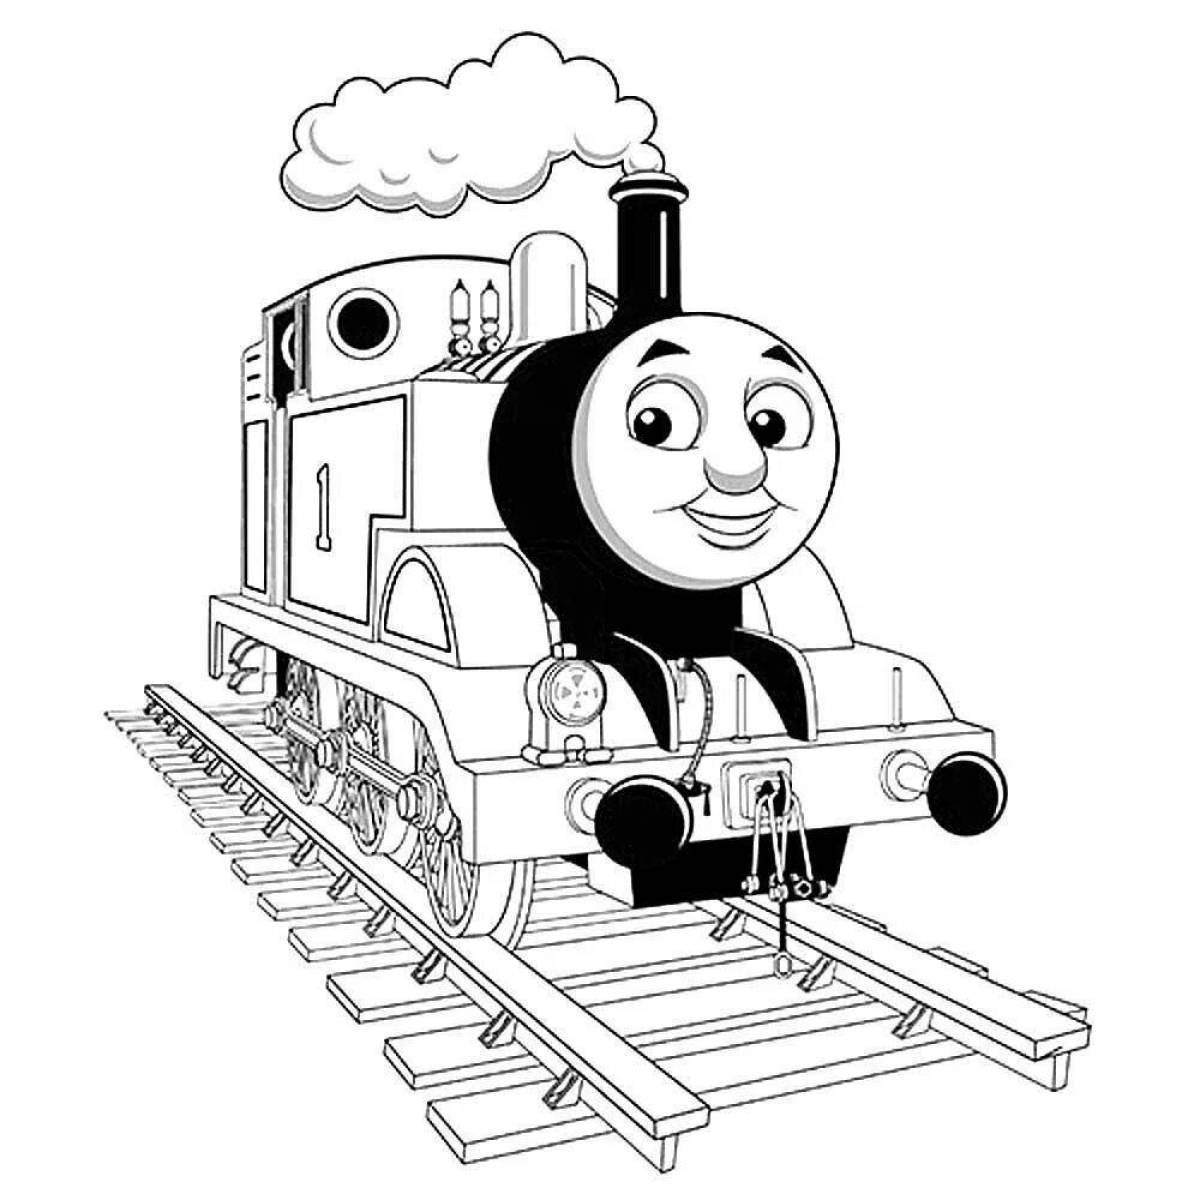 Thomas the Tank Engine coloring book for kids